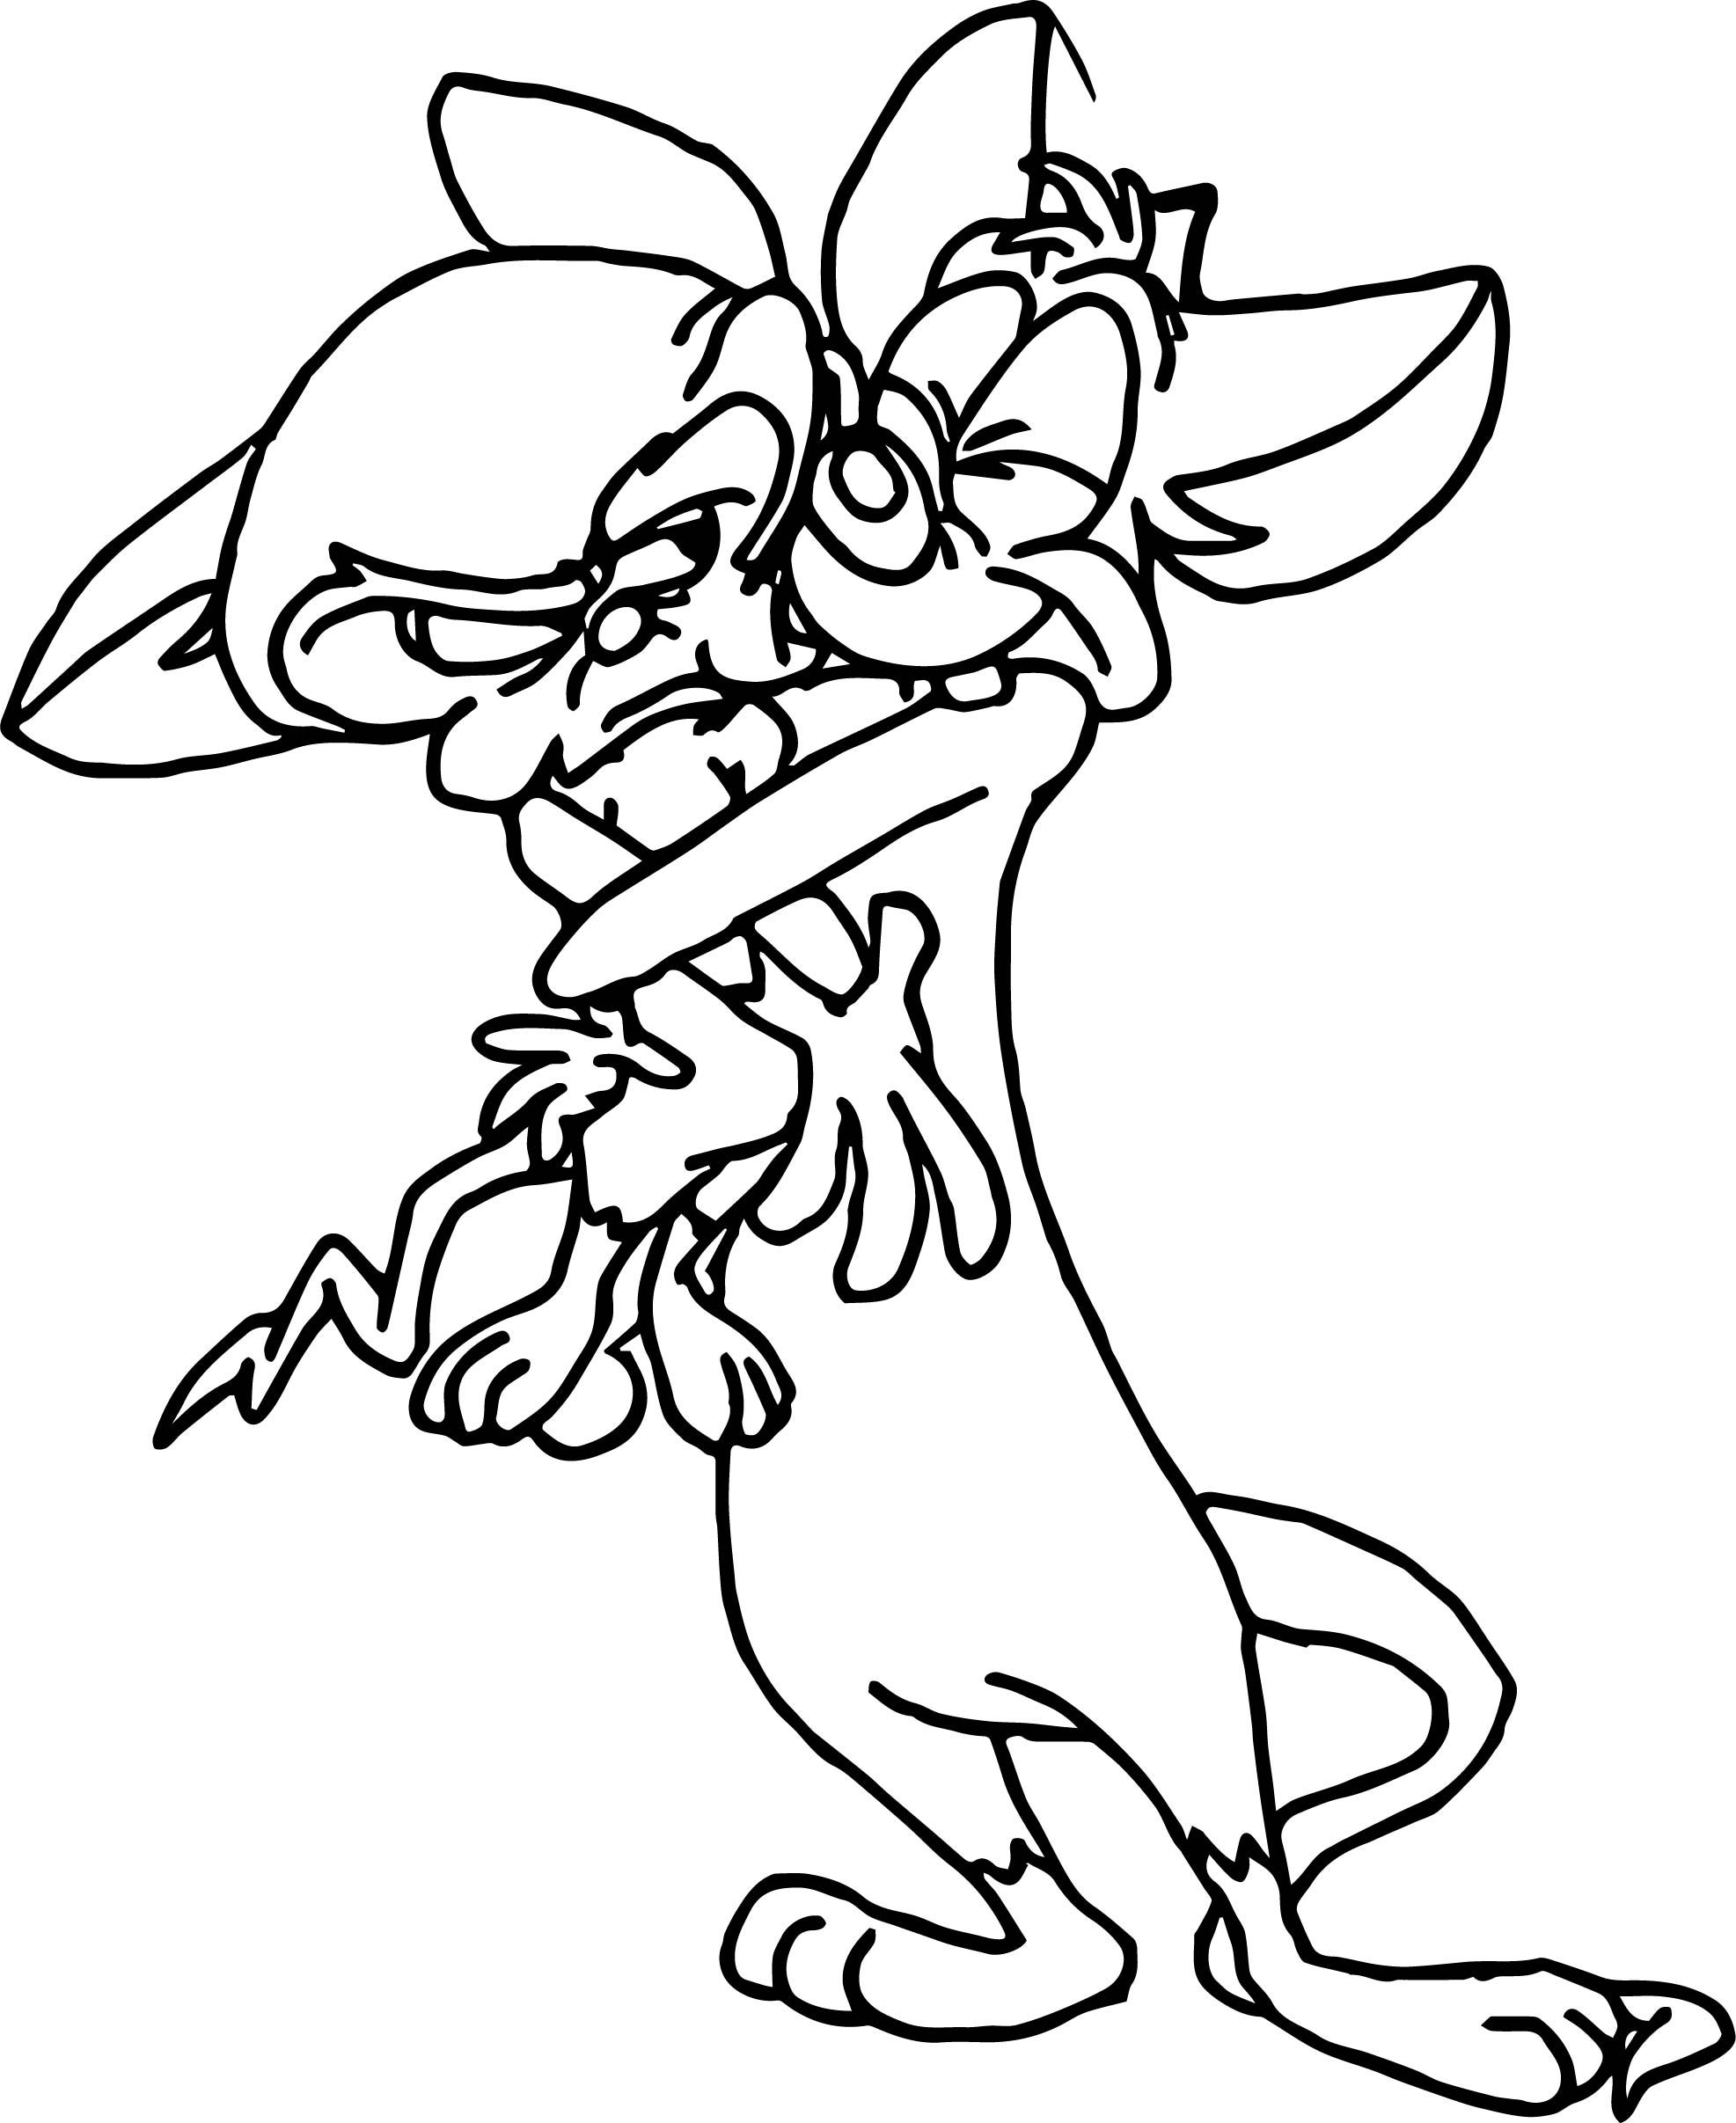 41+ The Brain Coloring Page PNG